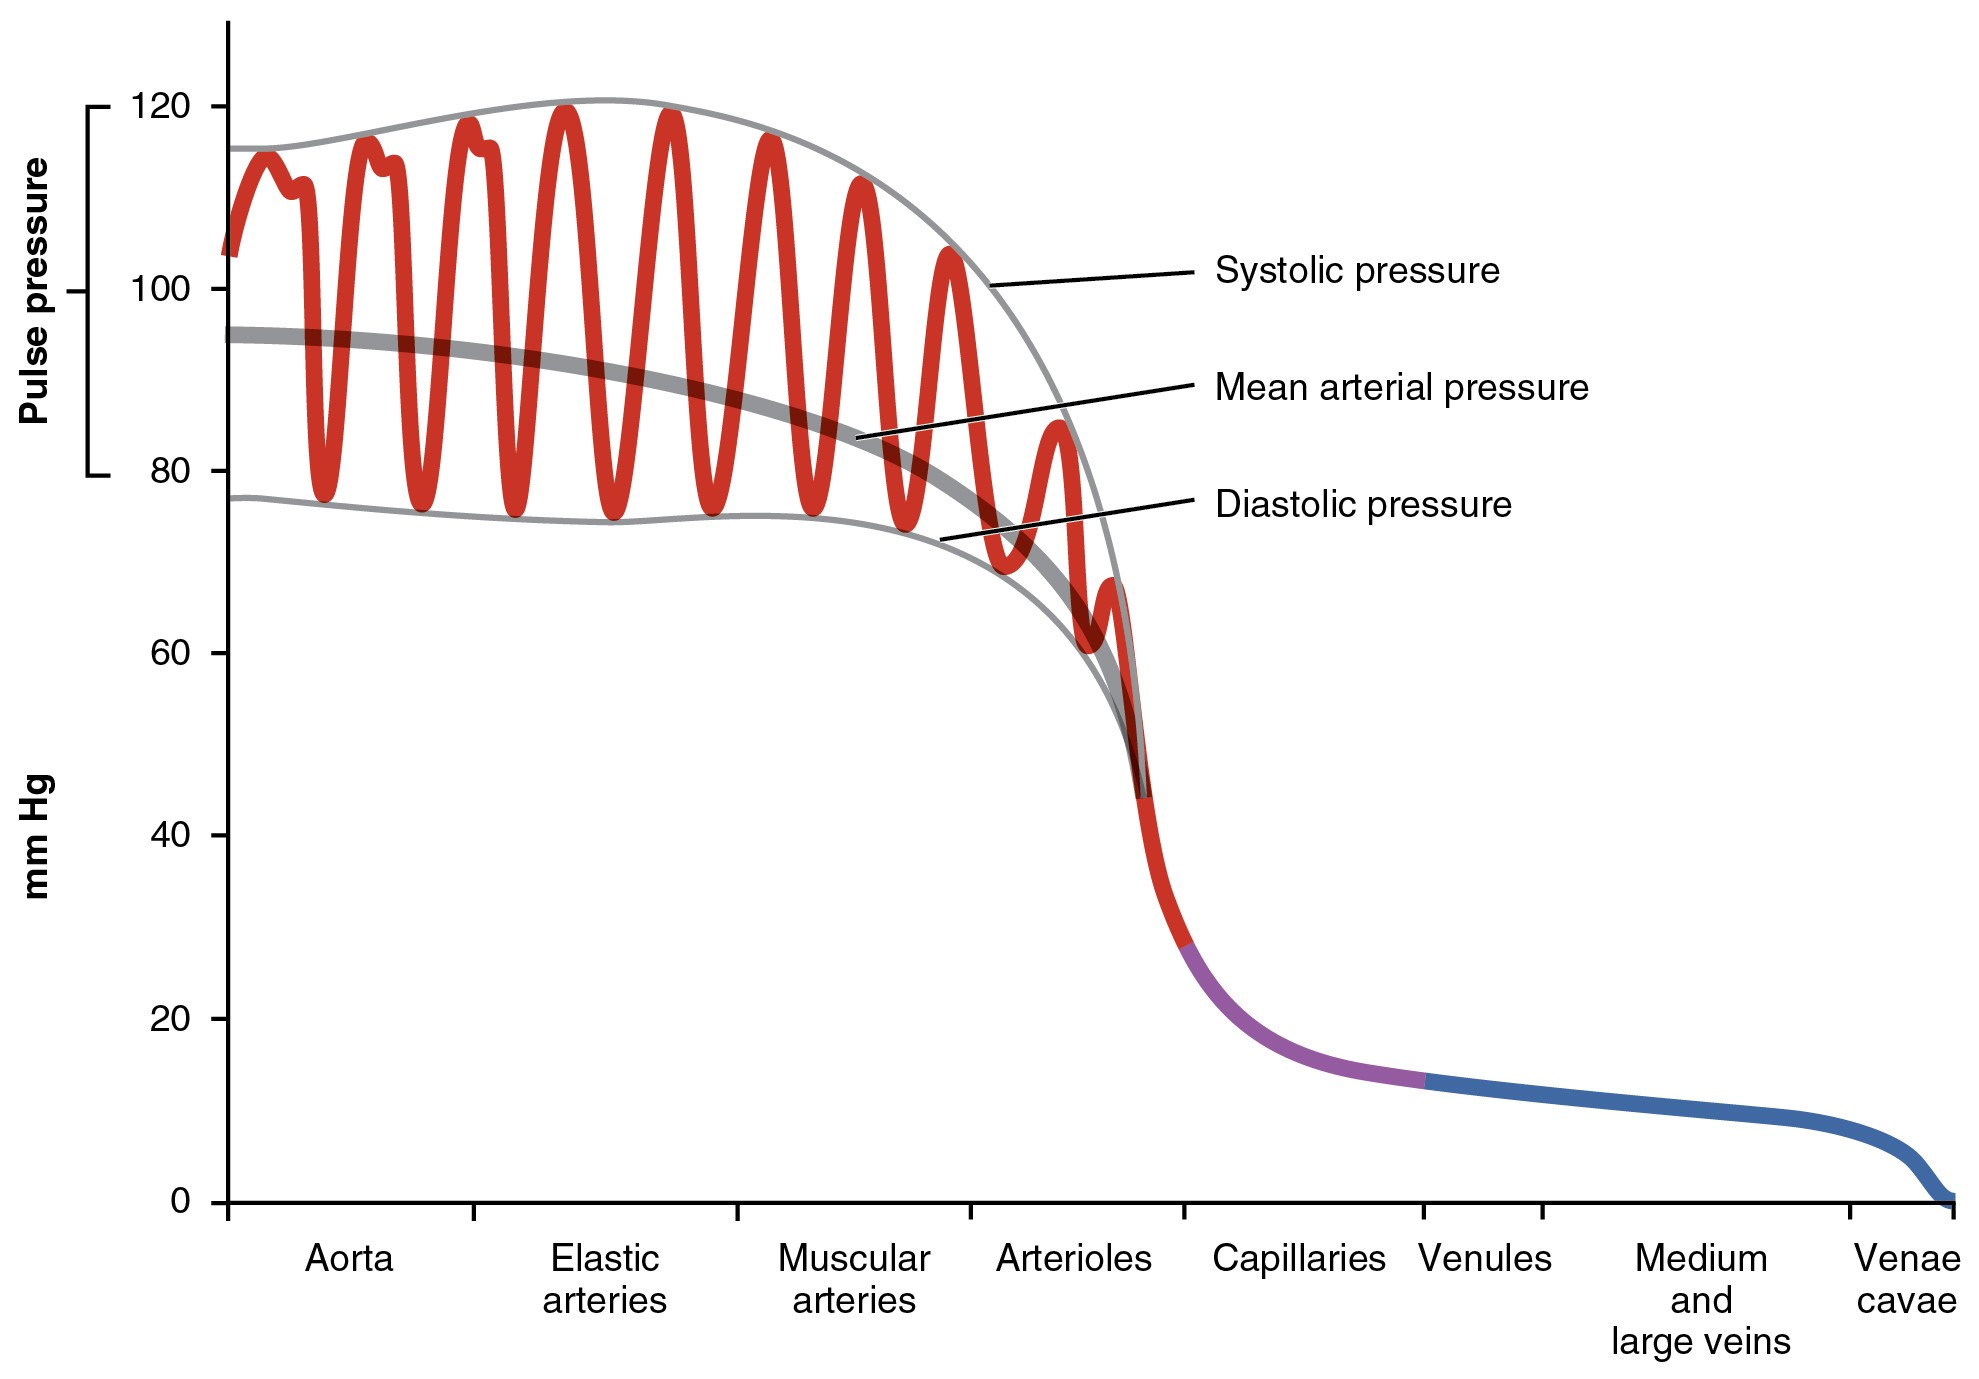 This graph shows the value of pulse pressure in different types of blood vessels